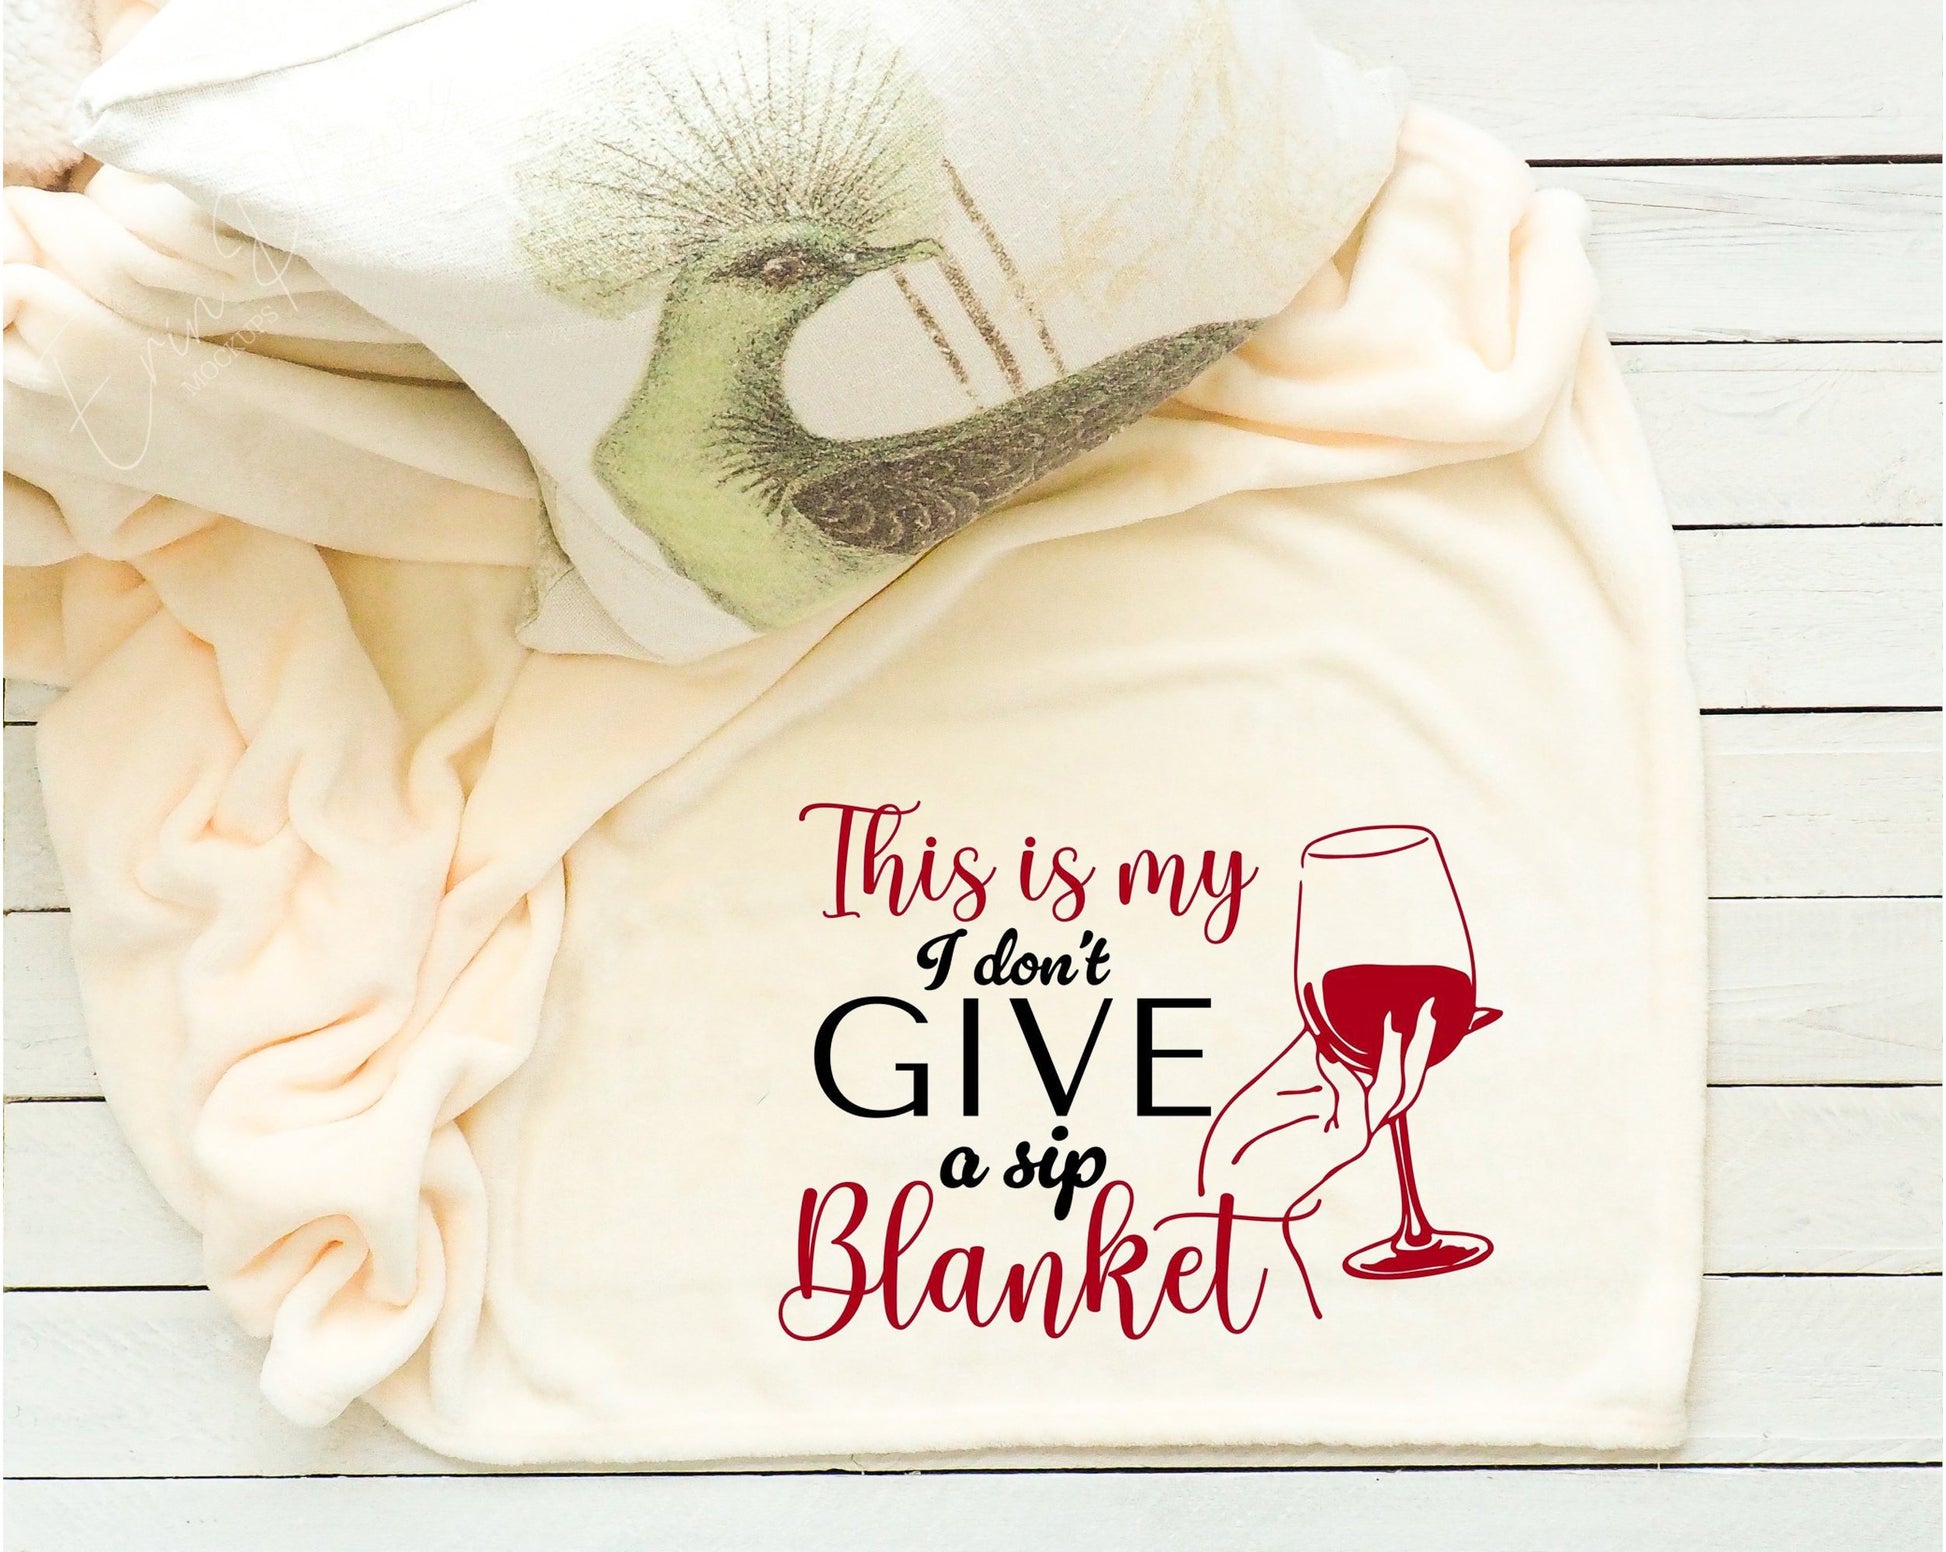 This Is My I Dont Give A Sip Blanket Fleece Throw Blanket